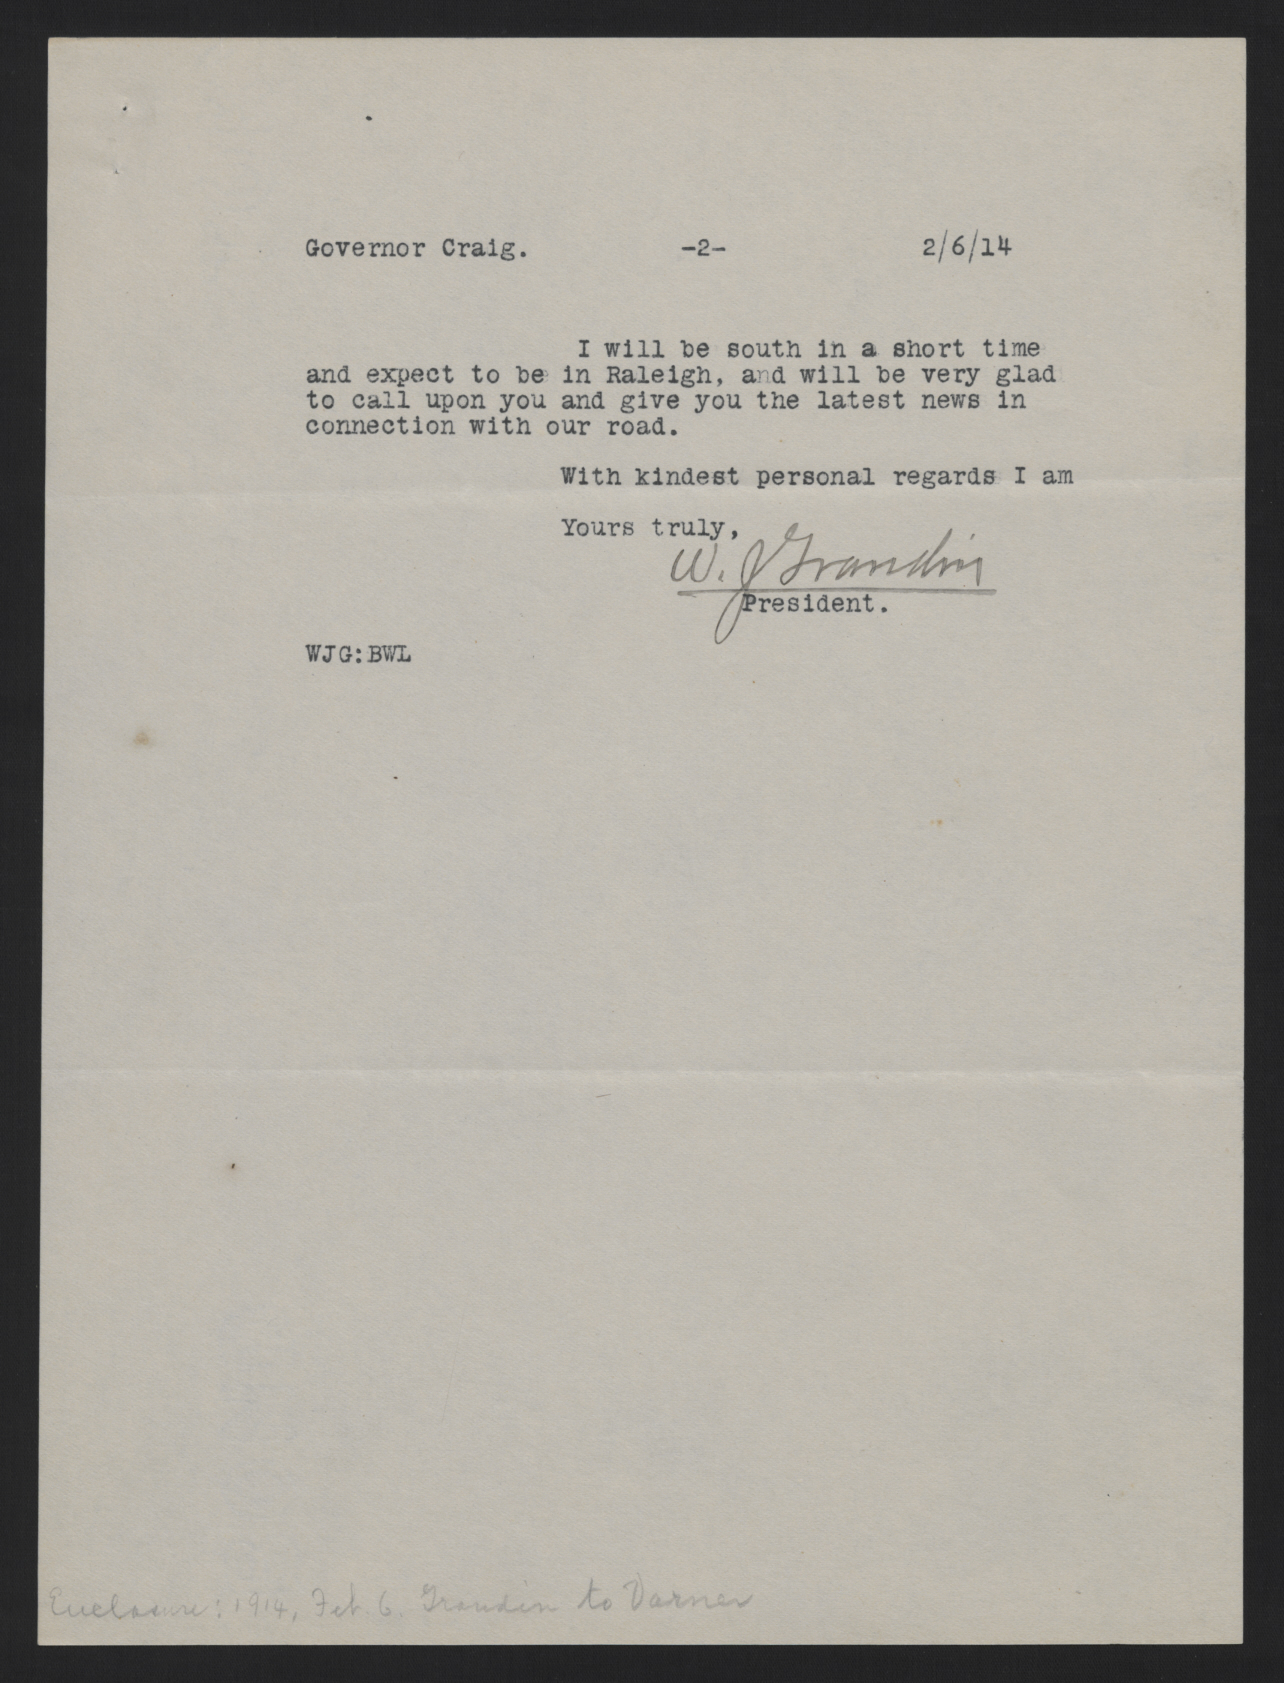 Letter from Grandin to Craig, February 6, 1914, page 2